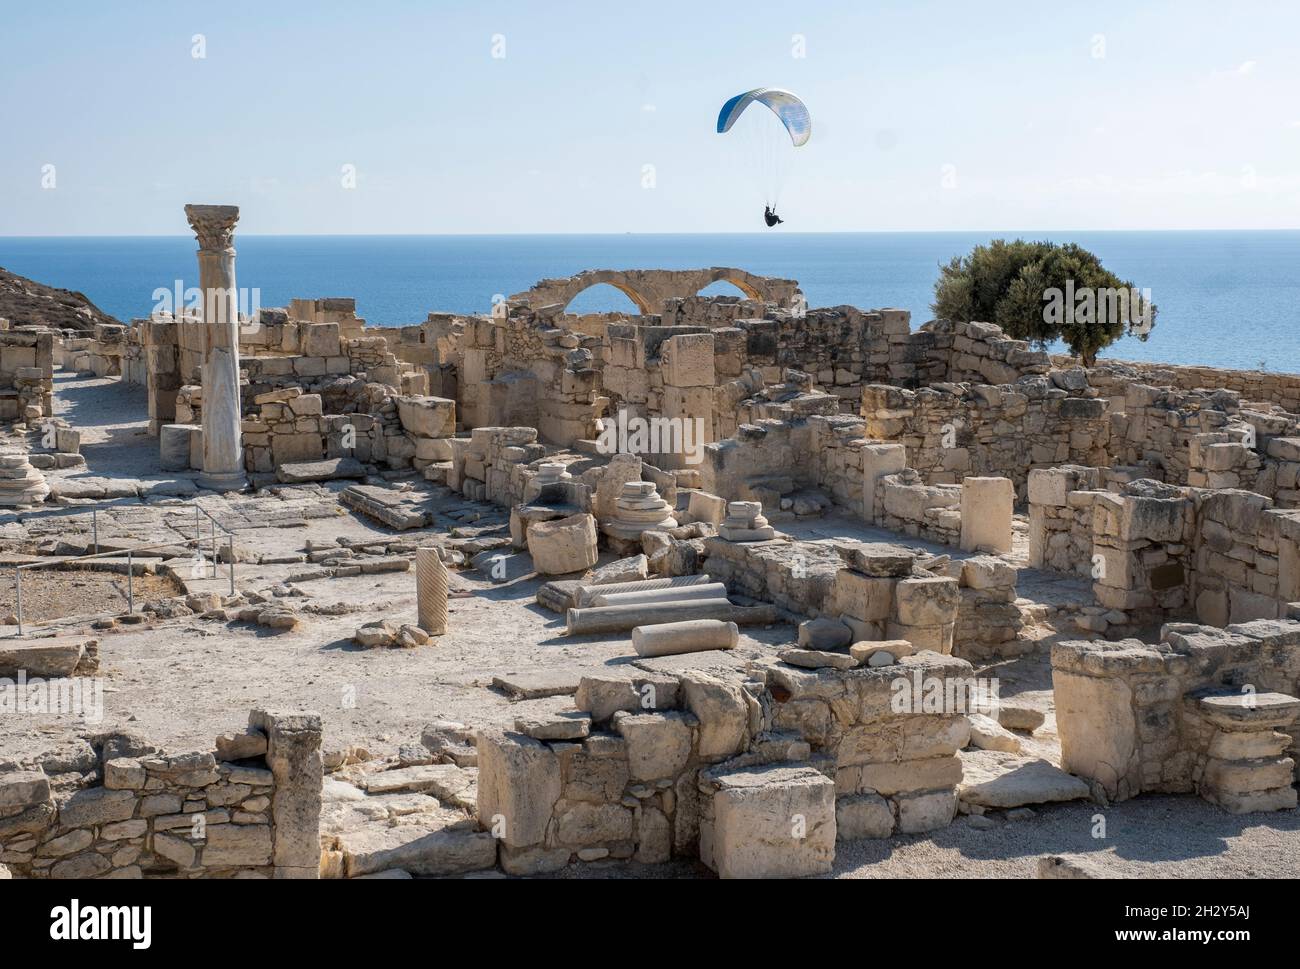 Paraglider glides over the early Christian Basilica ruins at the Archaeological Site of Kourion, Cyprus. Stock Photo